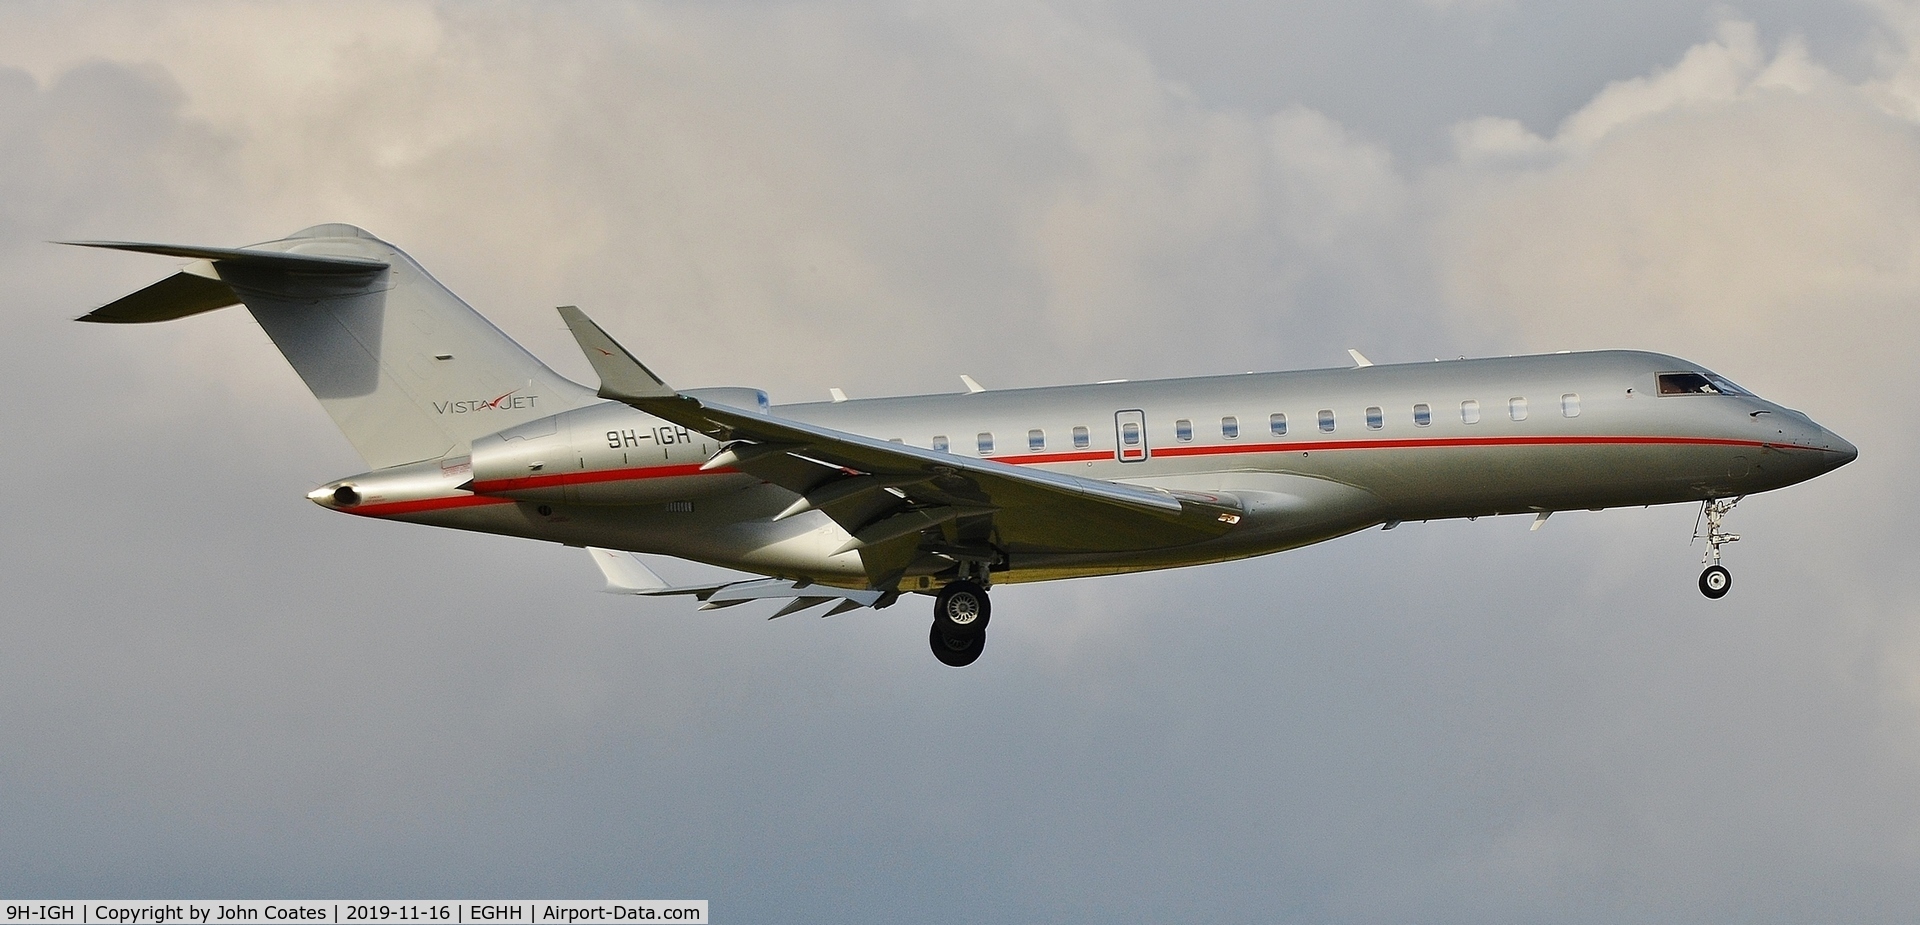 9H-IGH, 2013 Bombardier BD-700-1A10 Global 6000 C/N 9570, On finals during training